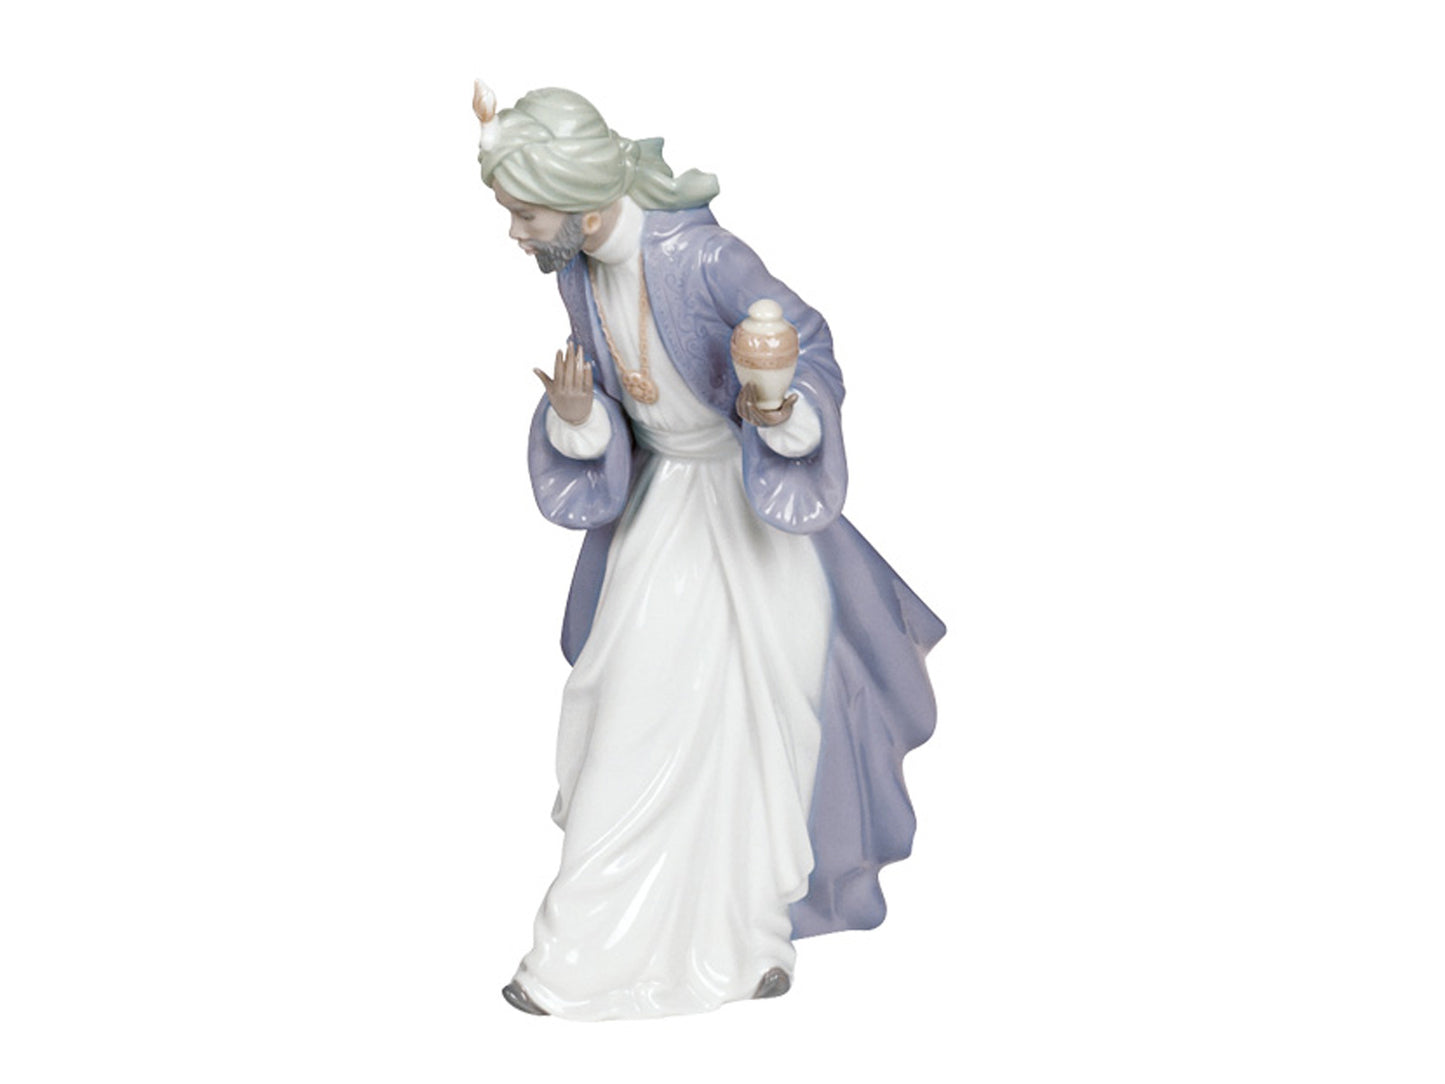 The King of Balthasar is one of the 3 kings to visit Baby Jesus on the night of his birth. Add the gift of Myrrh to your nativity scene this Christmas.